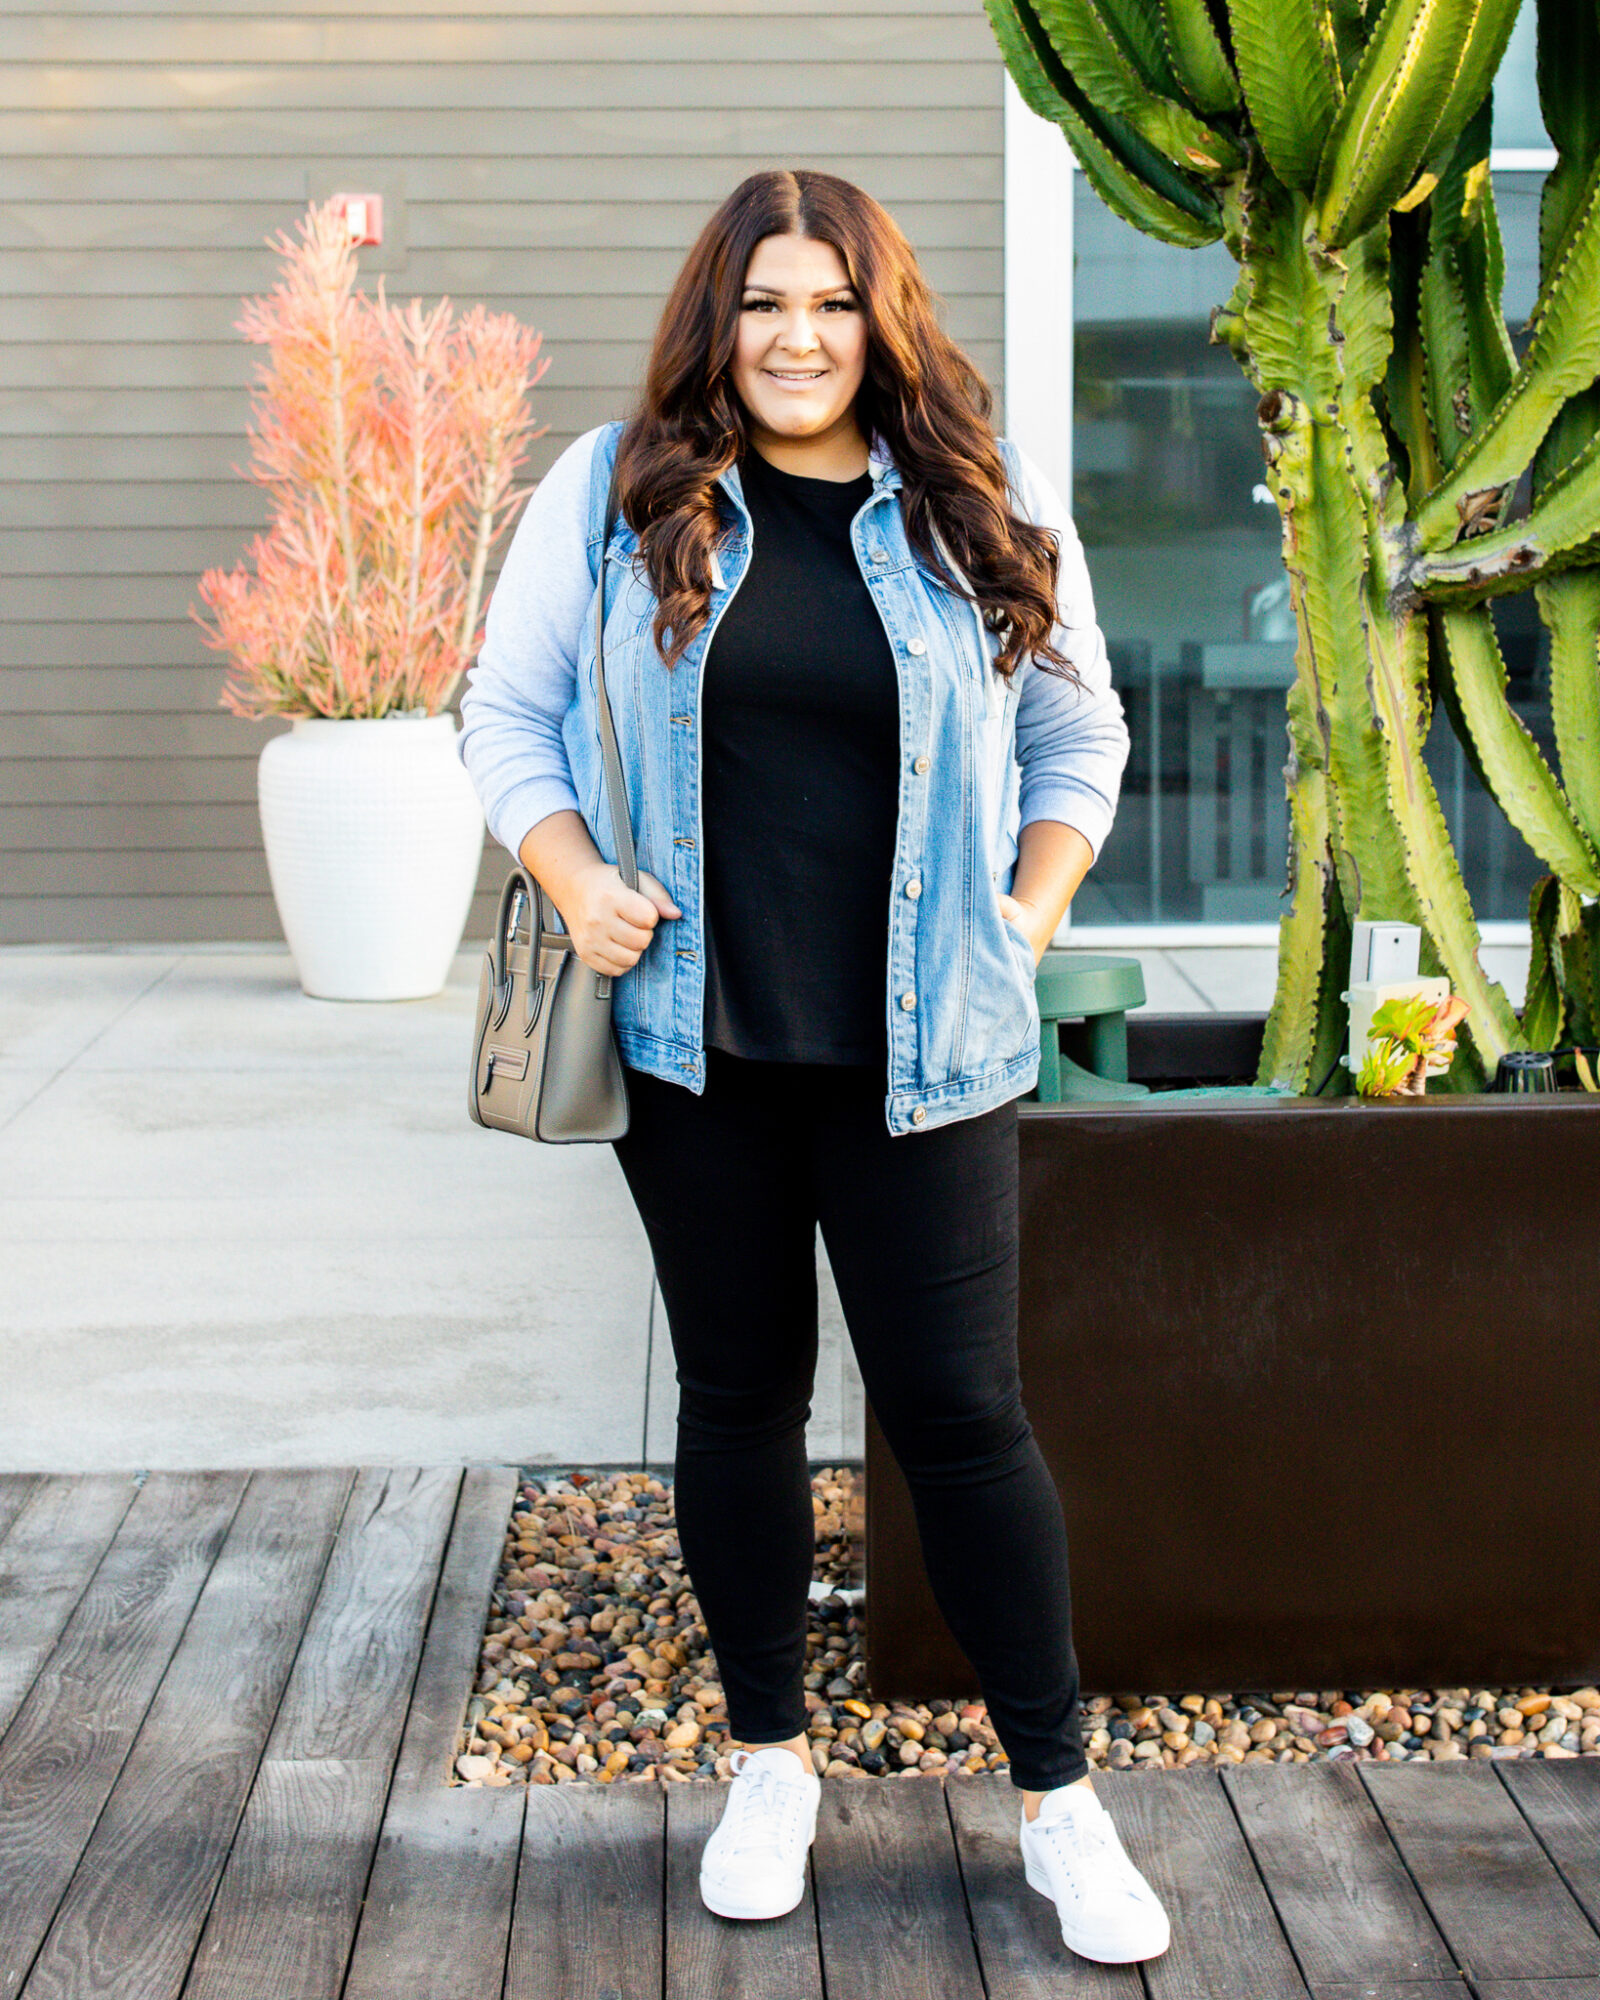 How to Style a Denim Jacket - Curves To Contour